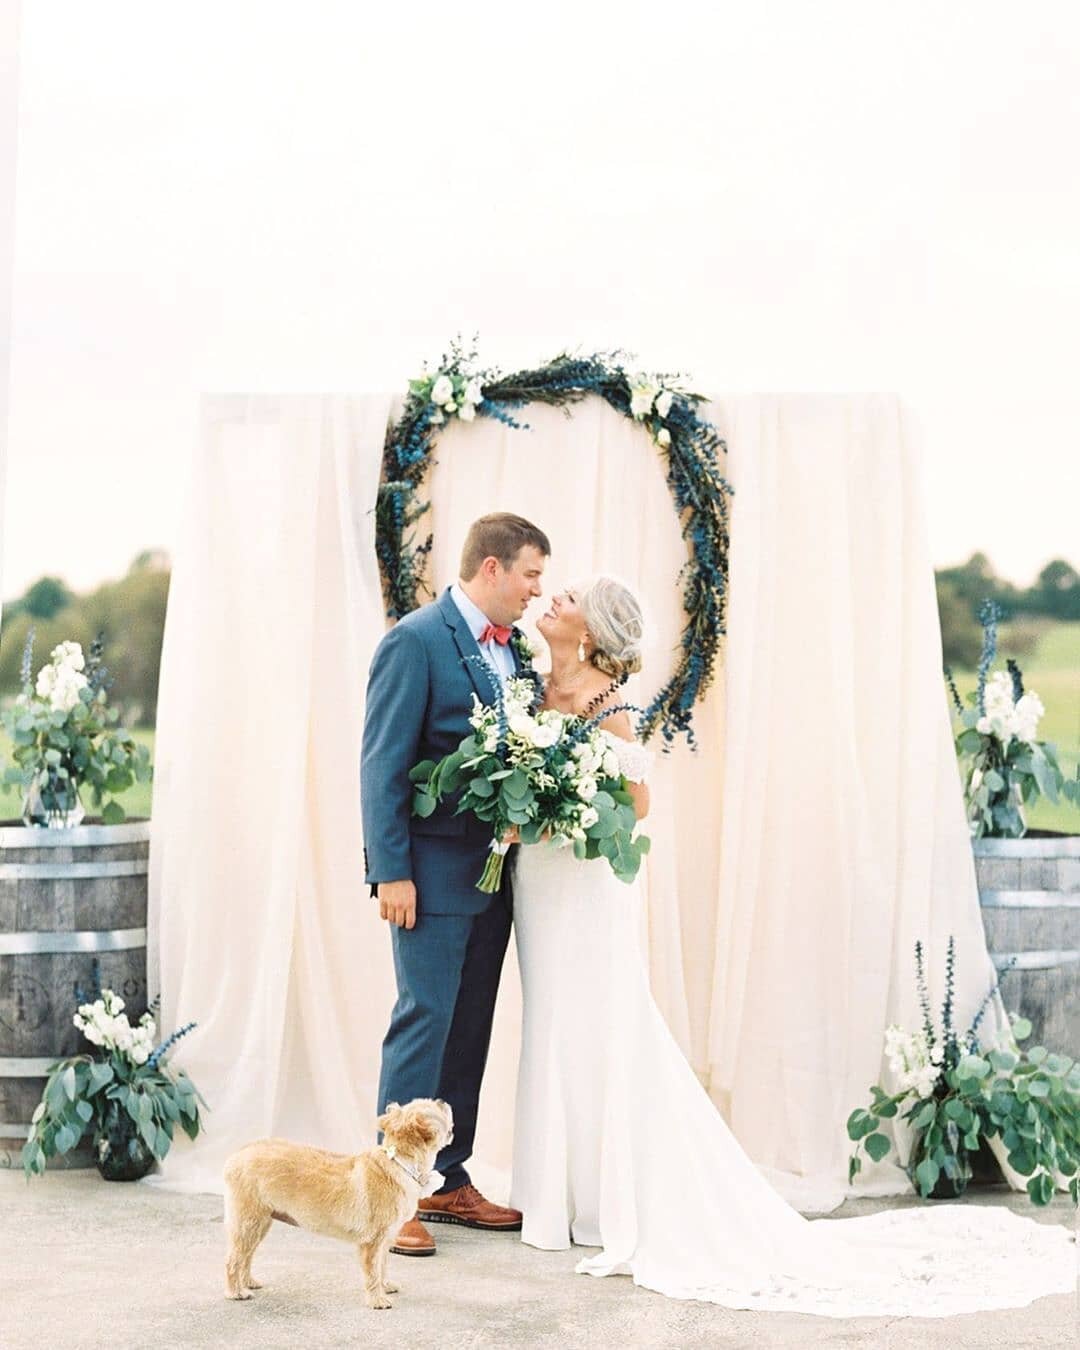 Spotted: Cute dog at a beautiful wedding. XOXO - KB (Please let us know if you read that in Gossip Girl's voice) &bull; Photography: @kellilynnphotography &bull; Venue: @talon_wine &bull; Film Lab: @photovisionprints #mykentuckybride